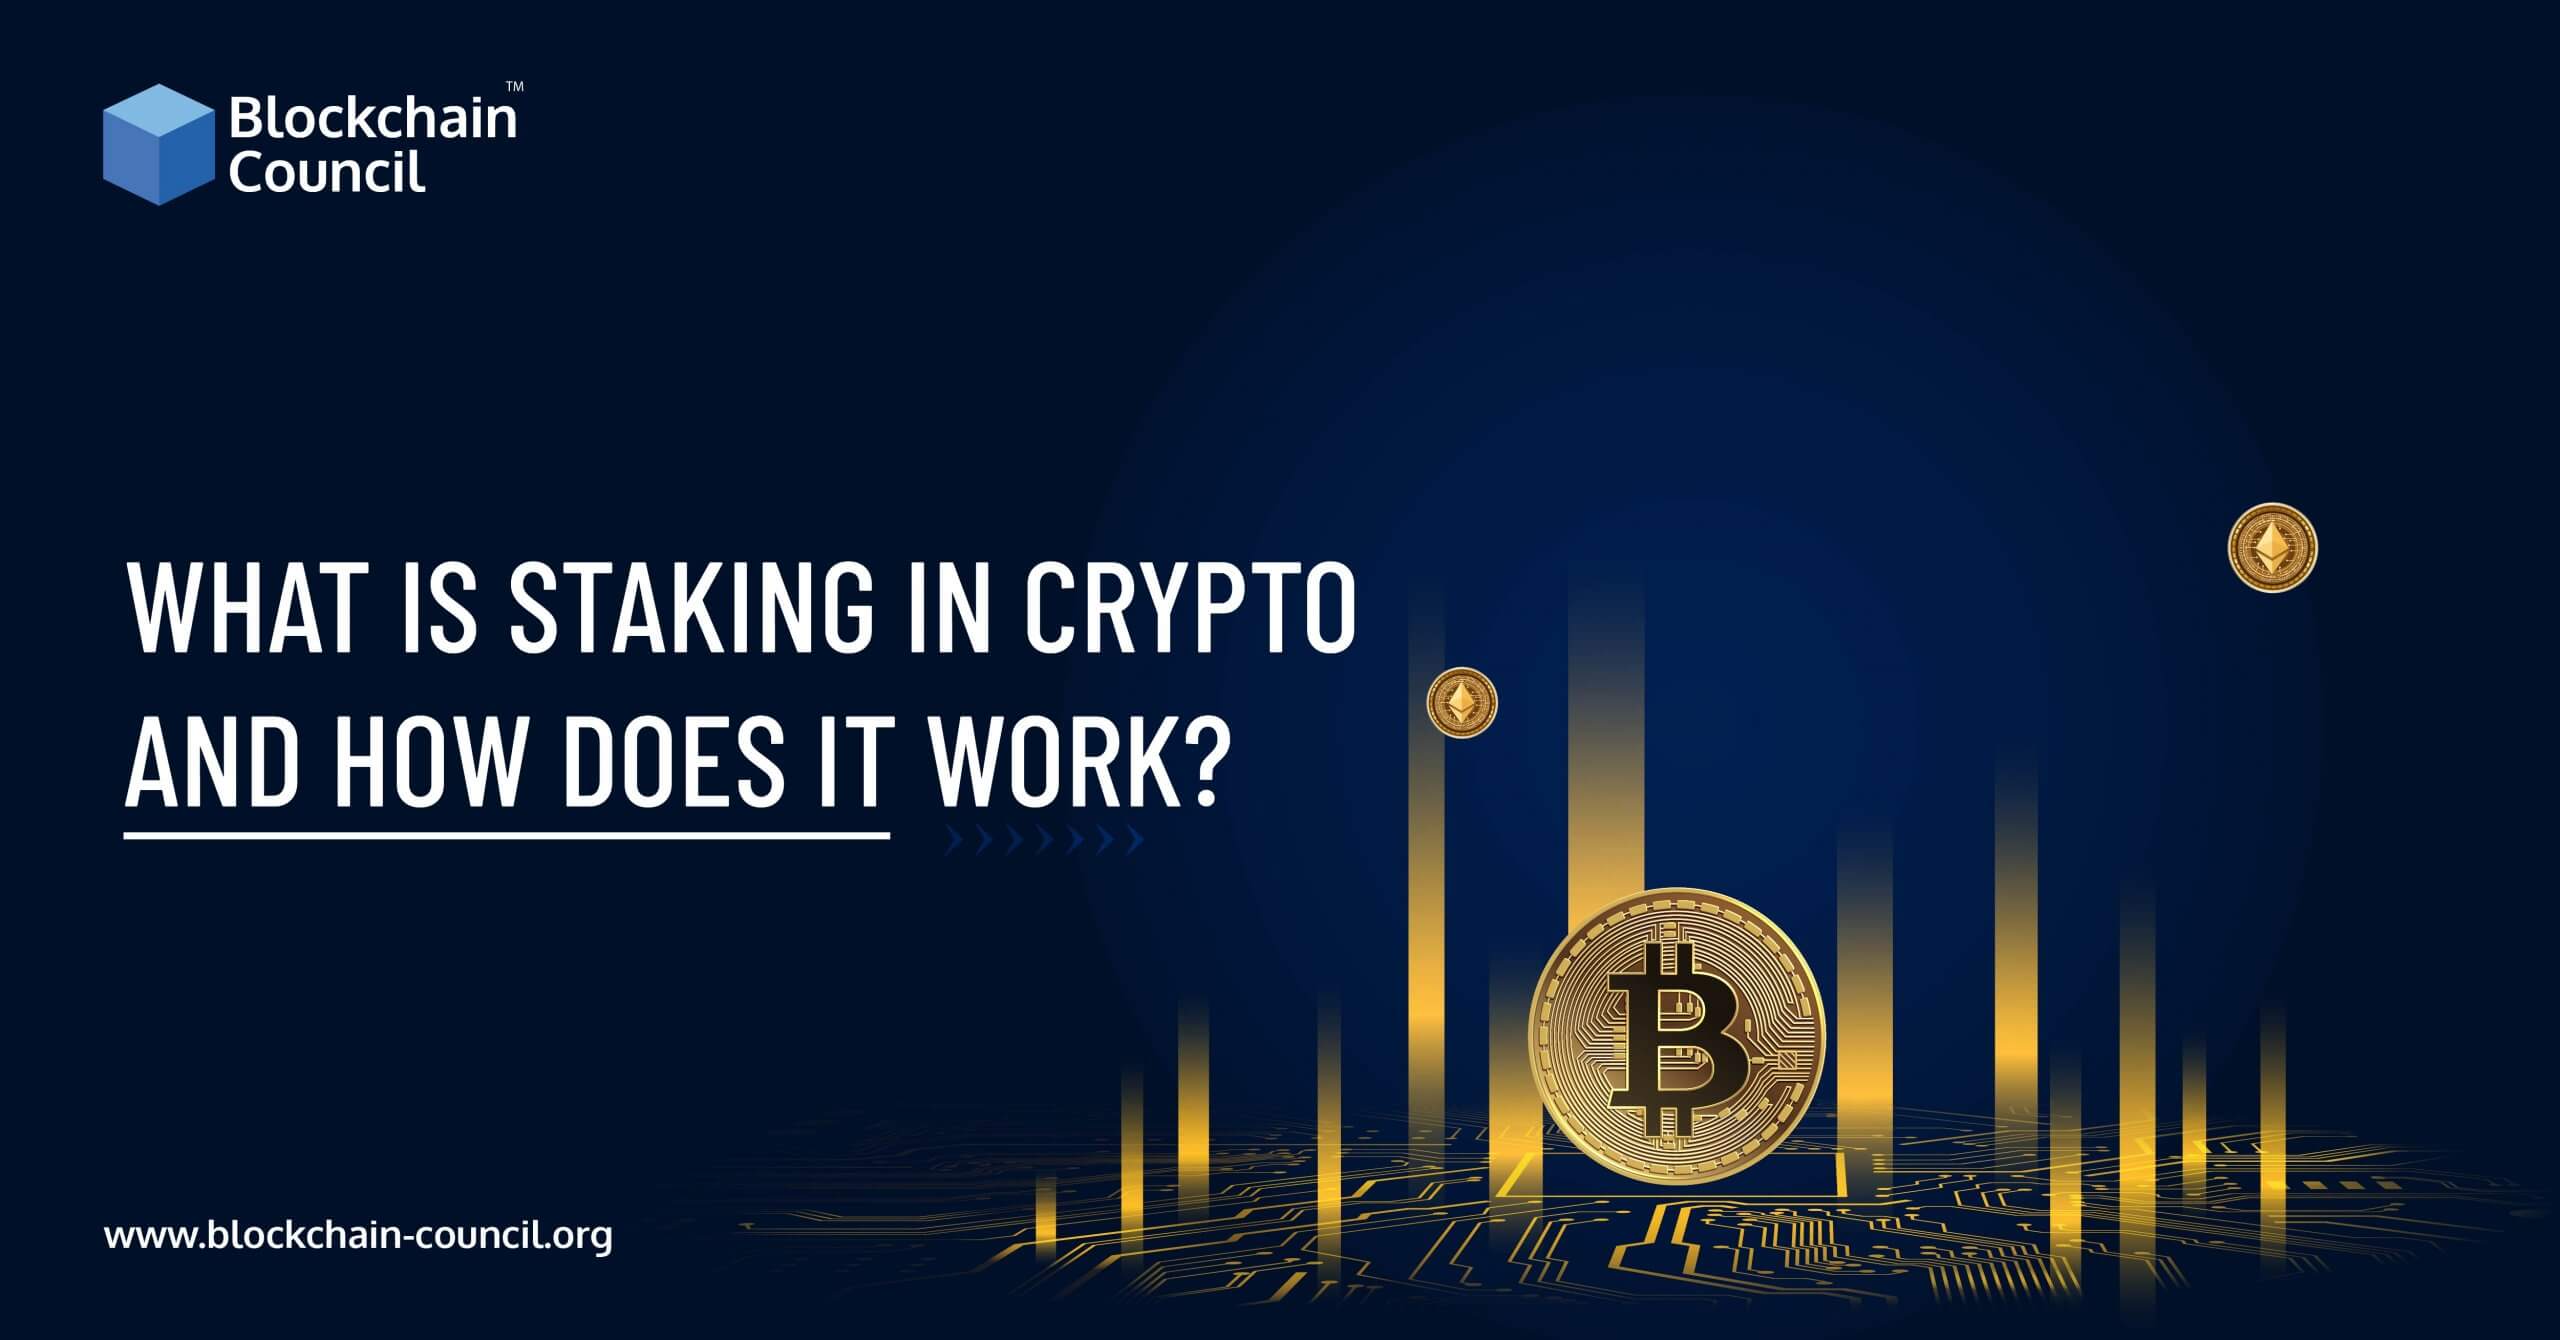 What Is Staking In Crypto and How Does It Work?